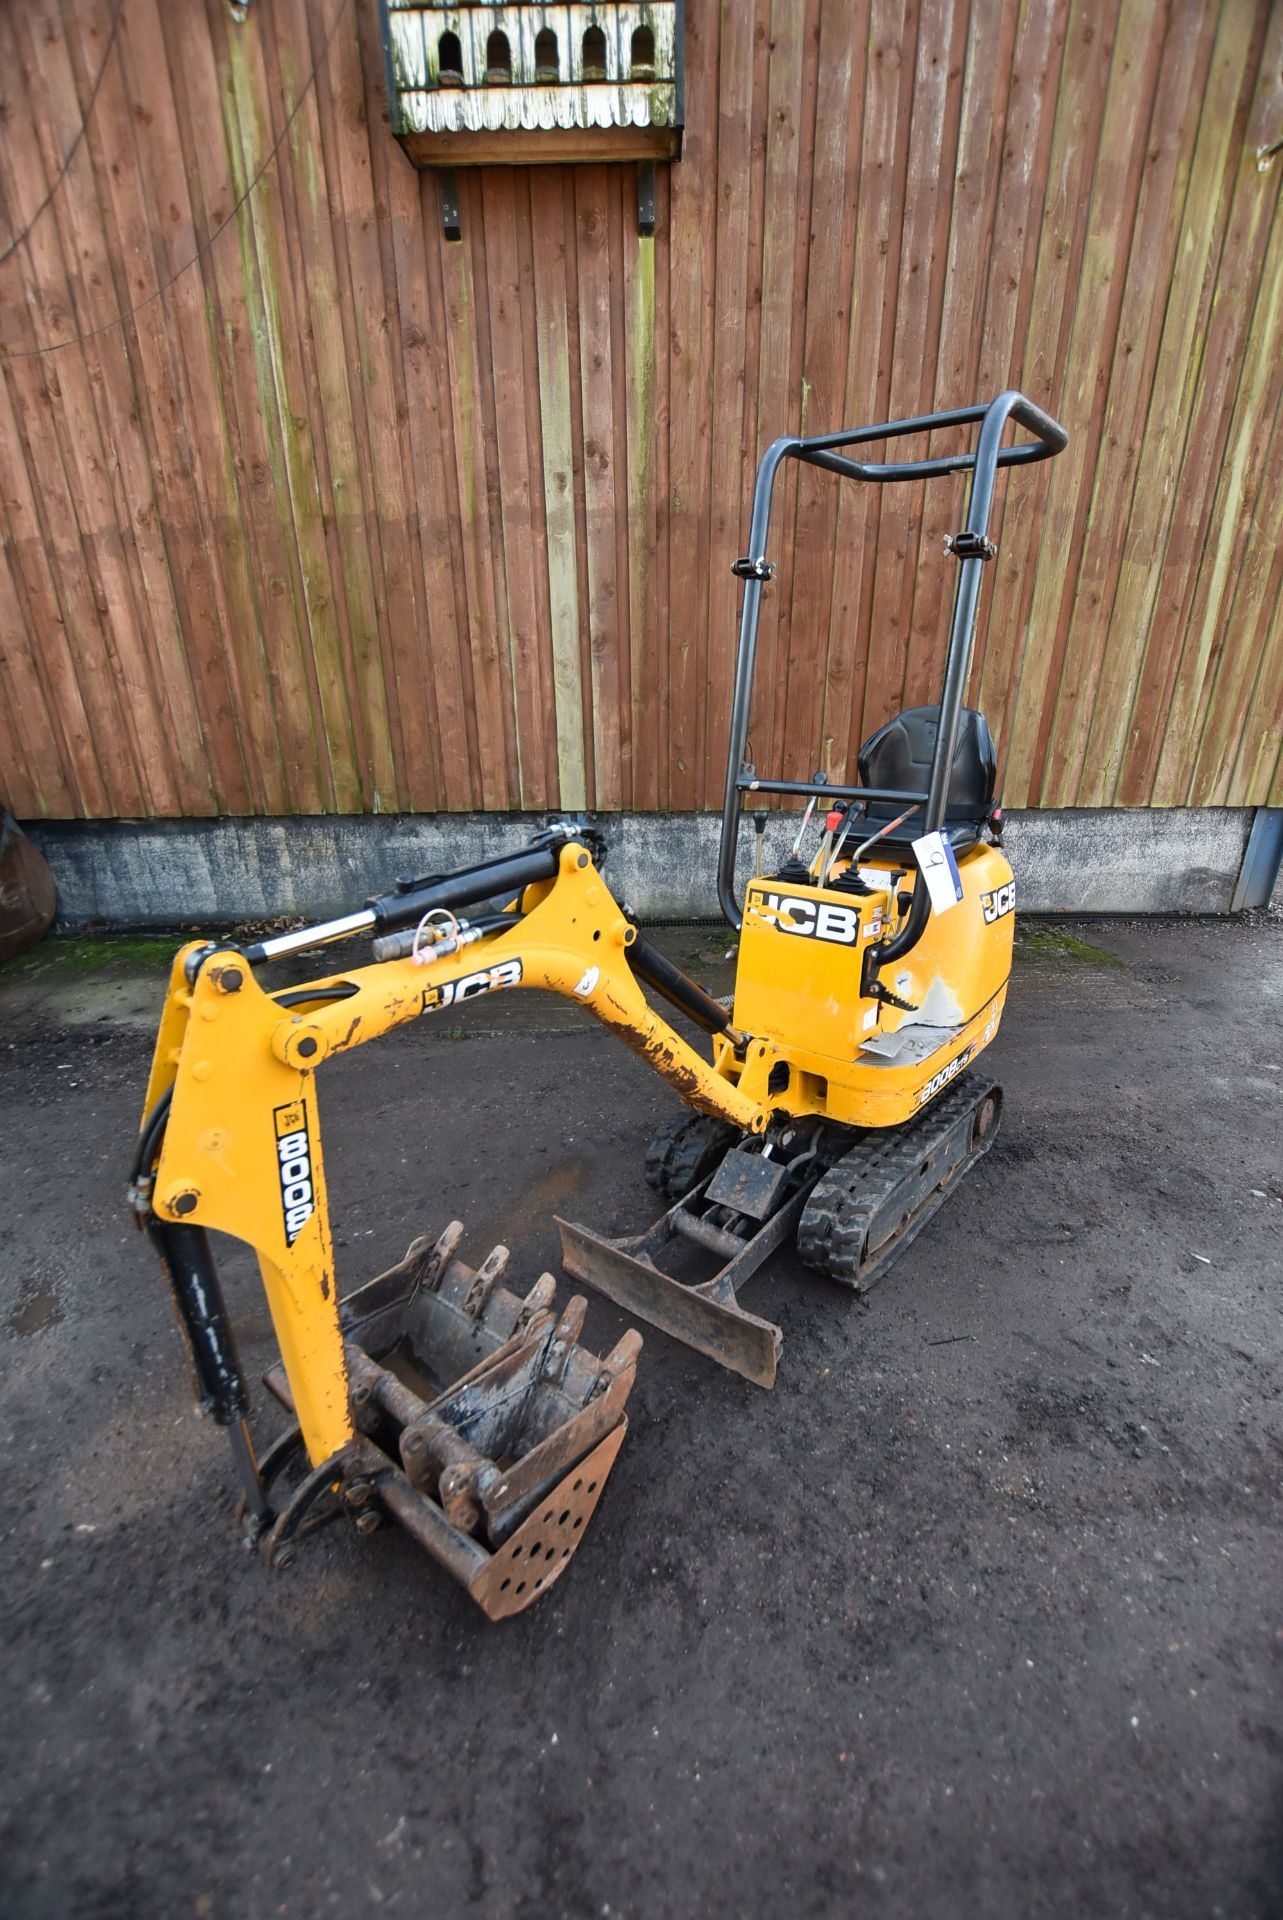 JCB 8008 CTS 950kg TRACKED COMPACT EXCAVATOR, serial no. 02410775, year of manufacture 2015,